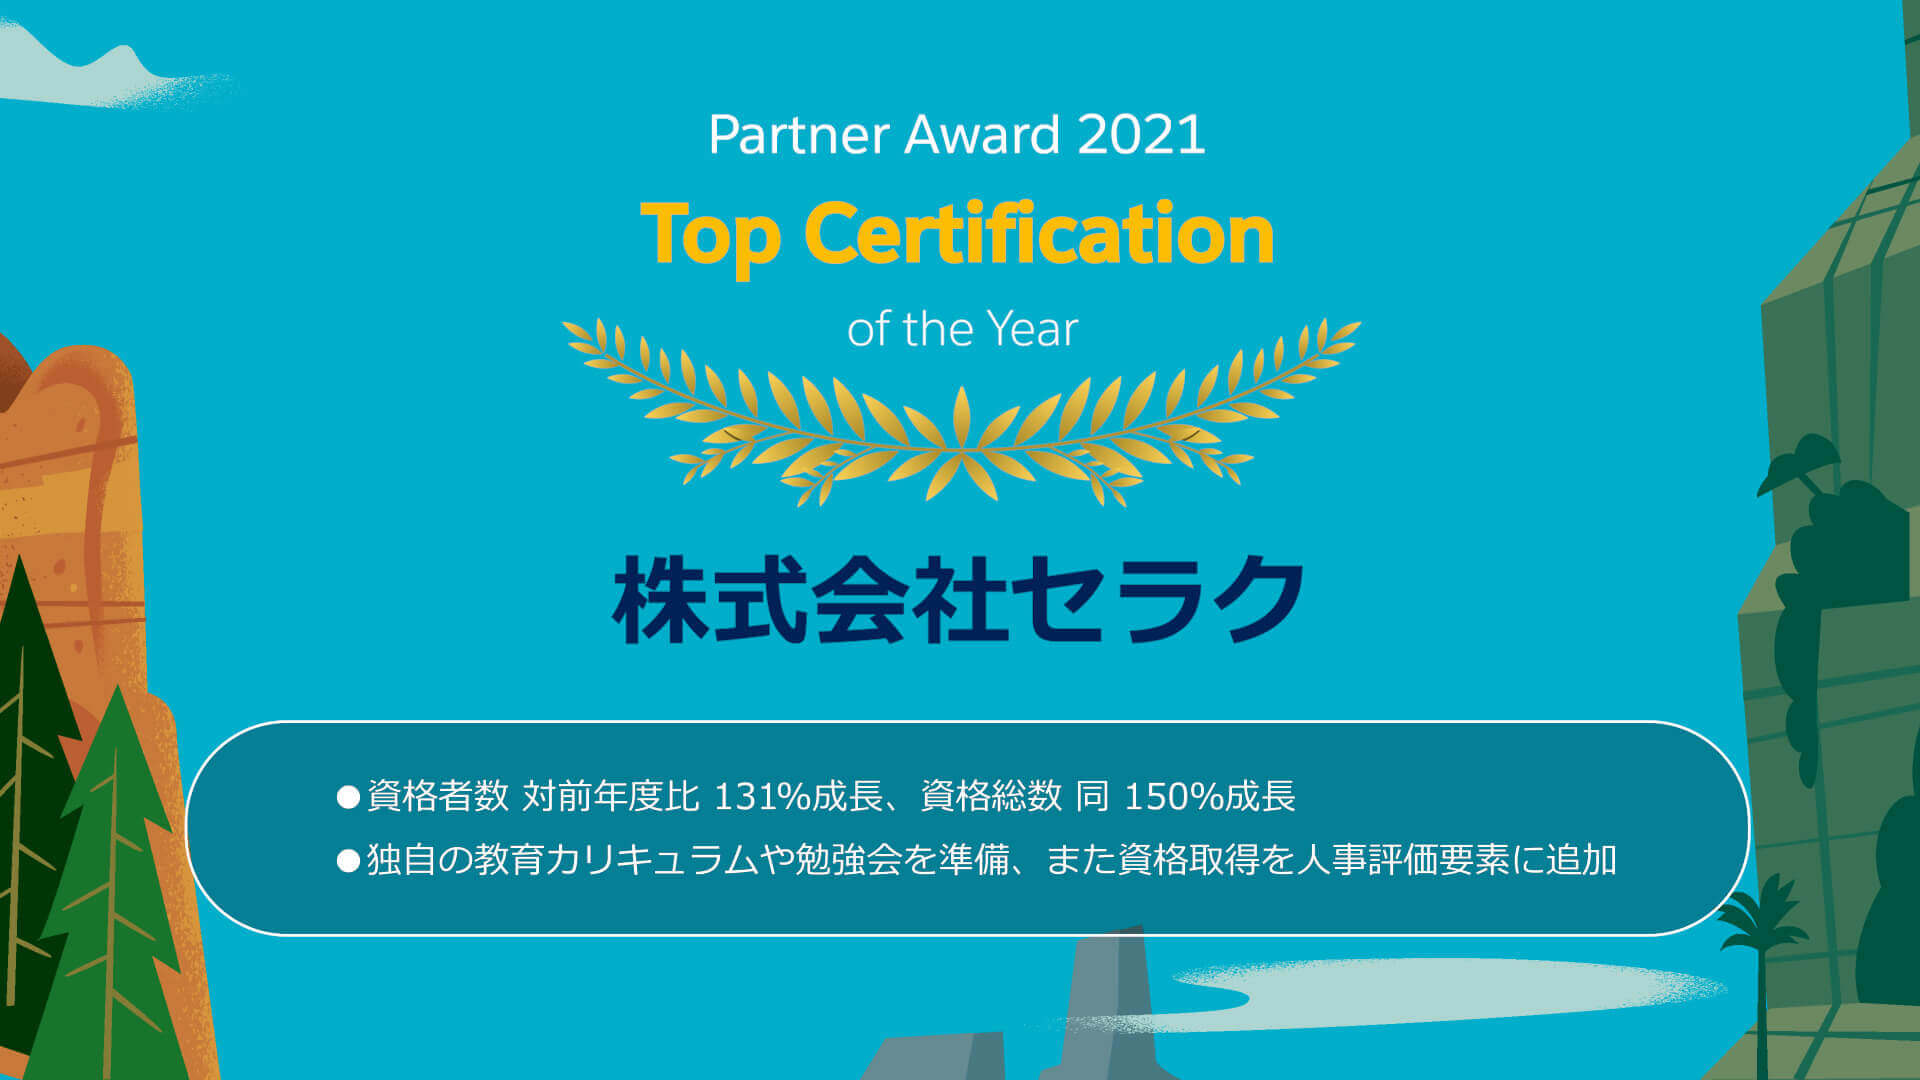 Salesforce Partner Summit 2021にて「Top Certification of the Year」を受賞